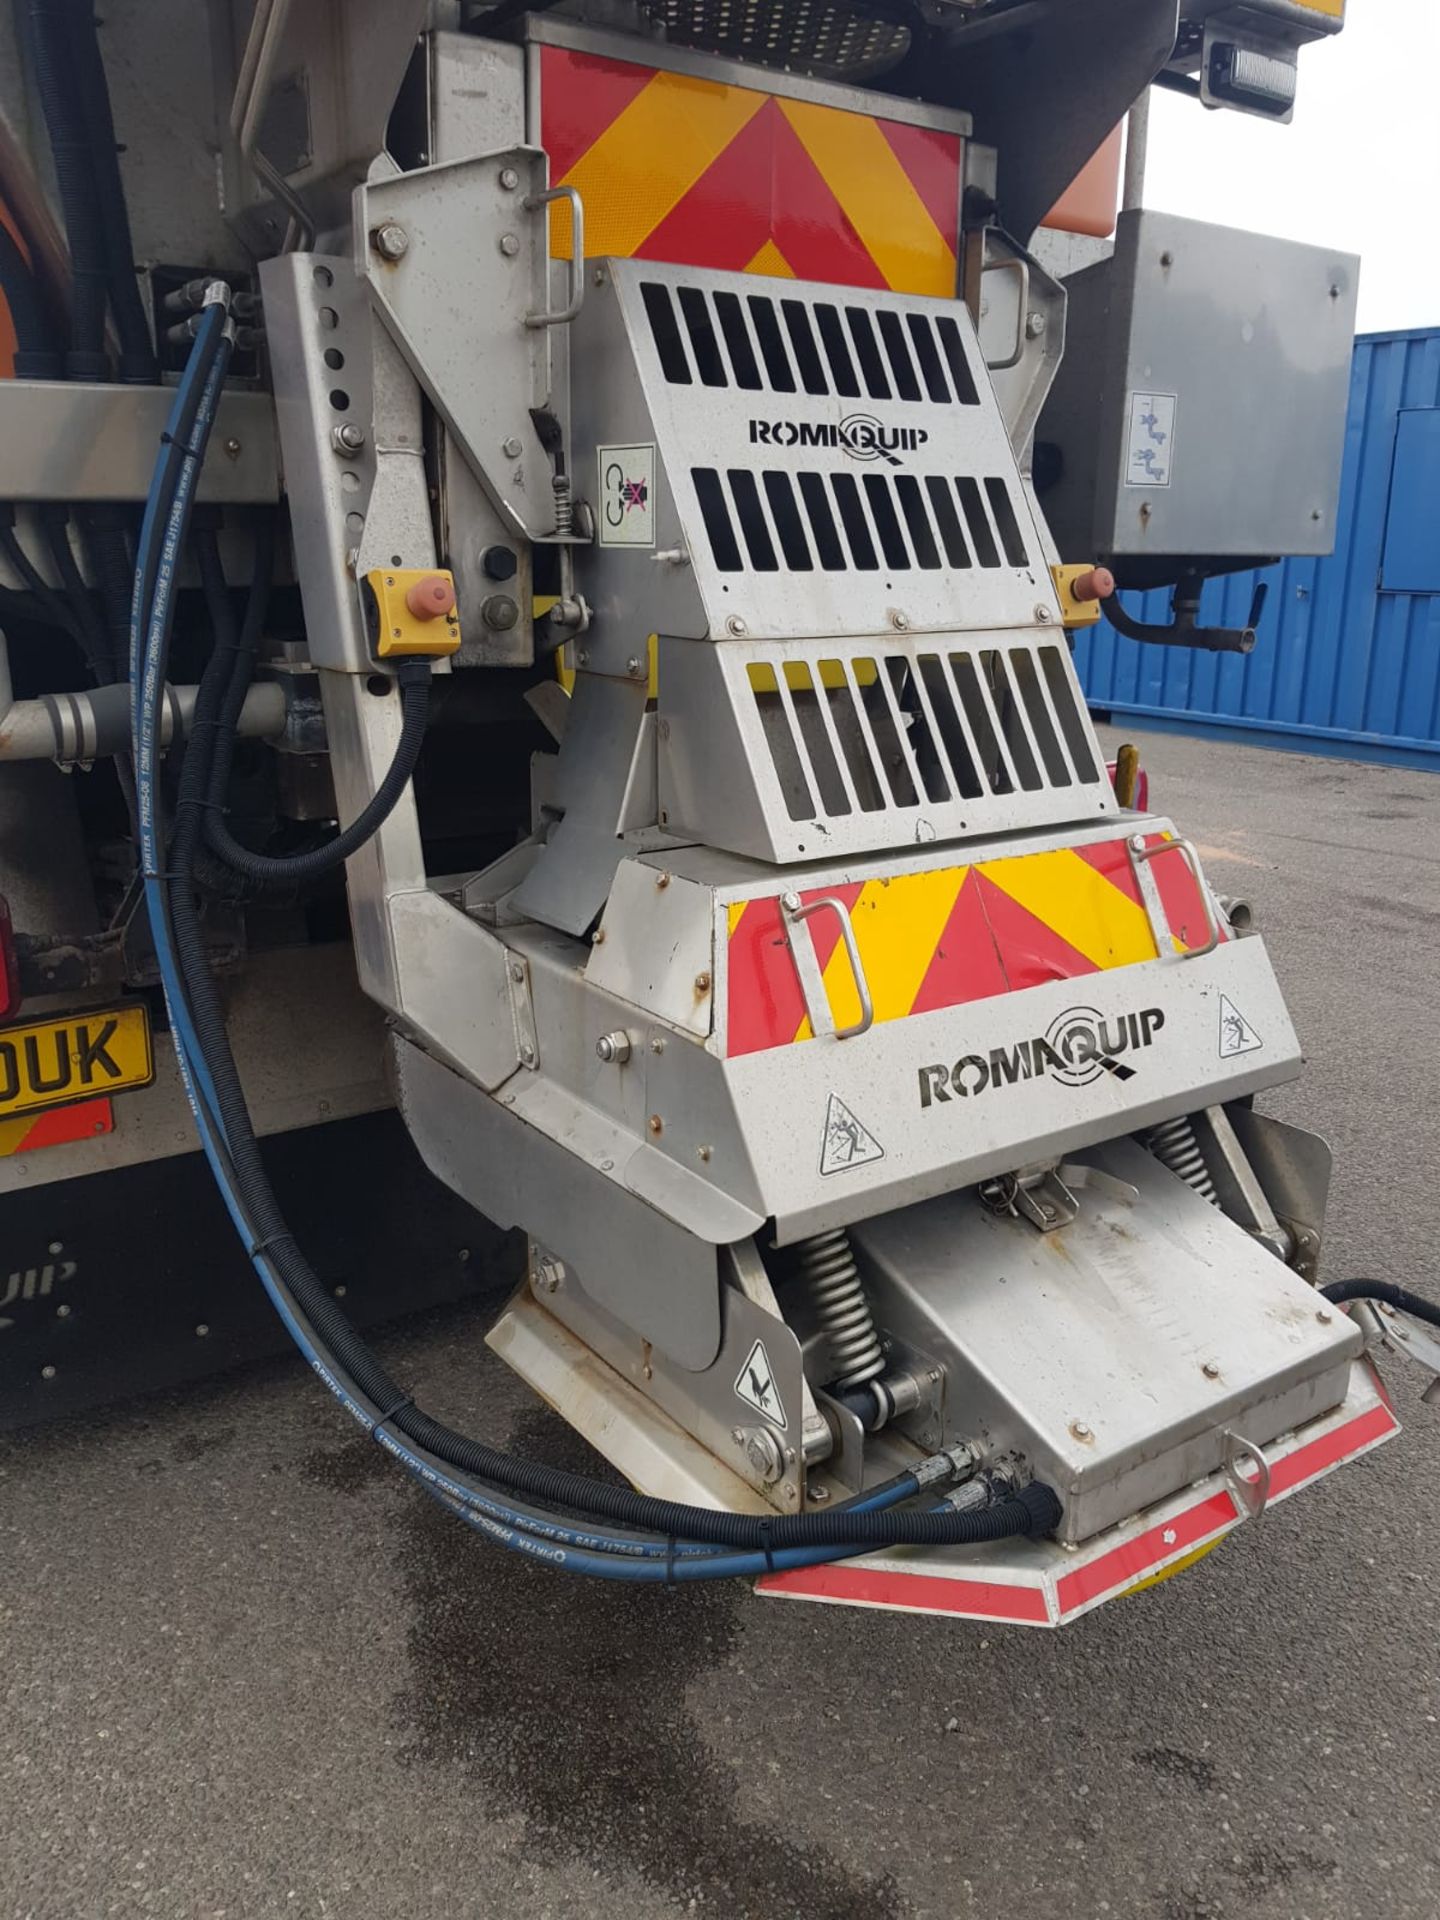 MAN 2009 (reg GN09 OUK) TGM 18.280 4x4 with ROMAQUIP pre-wet gritter mount. - Image 10 of 23